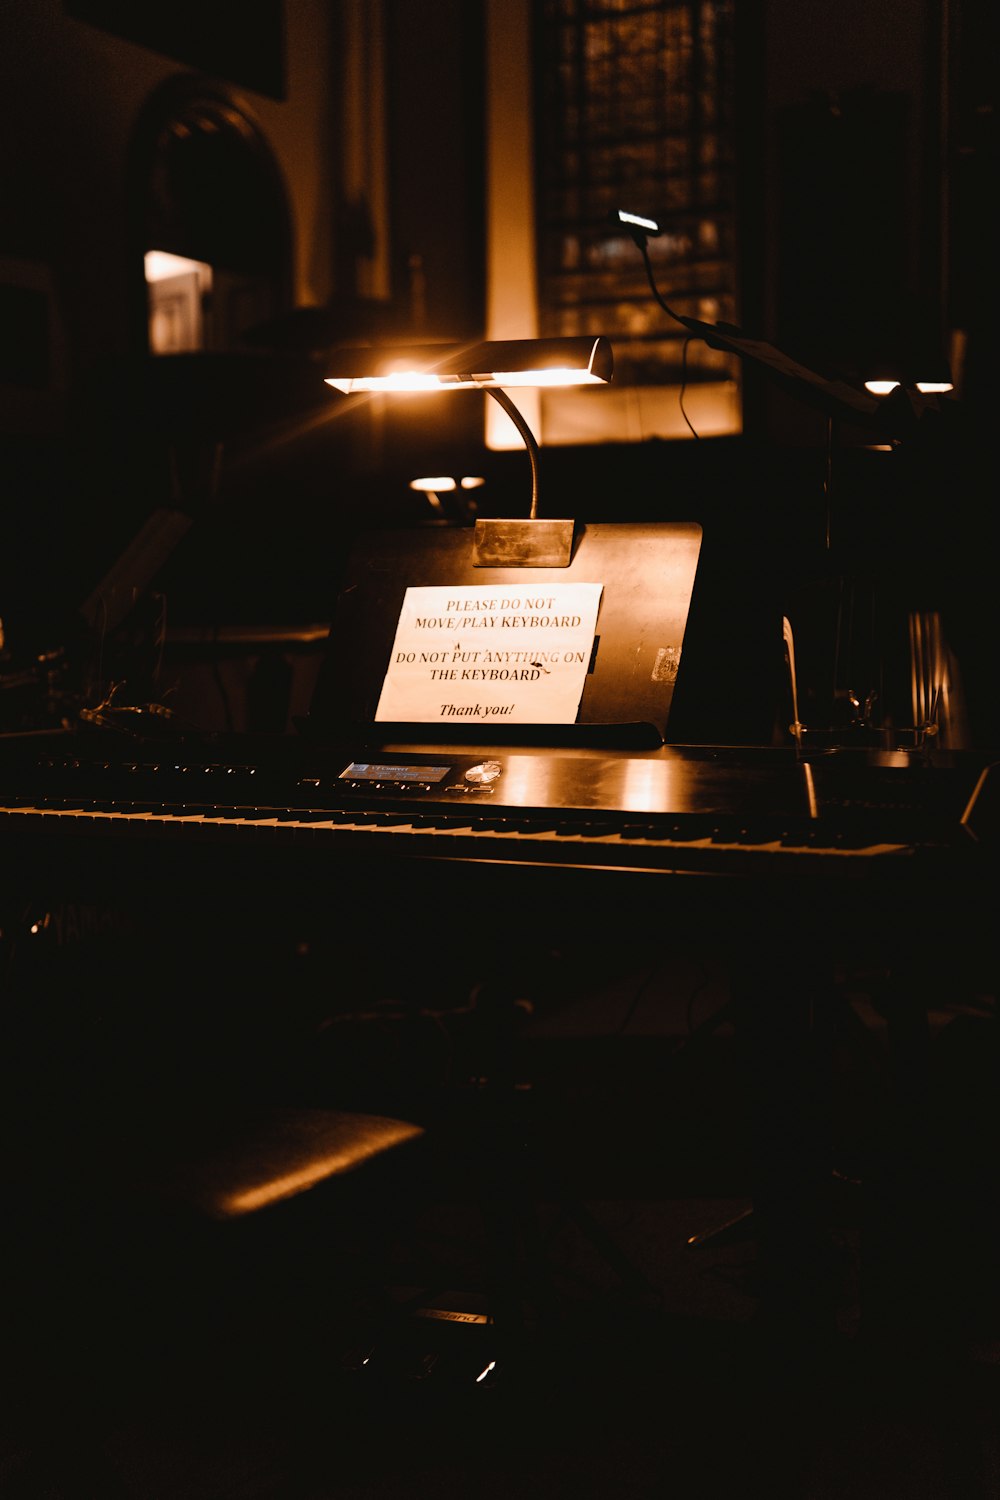 a piano with a note attached to it in a dark room